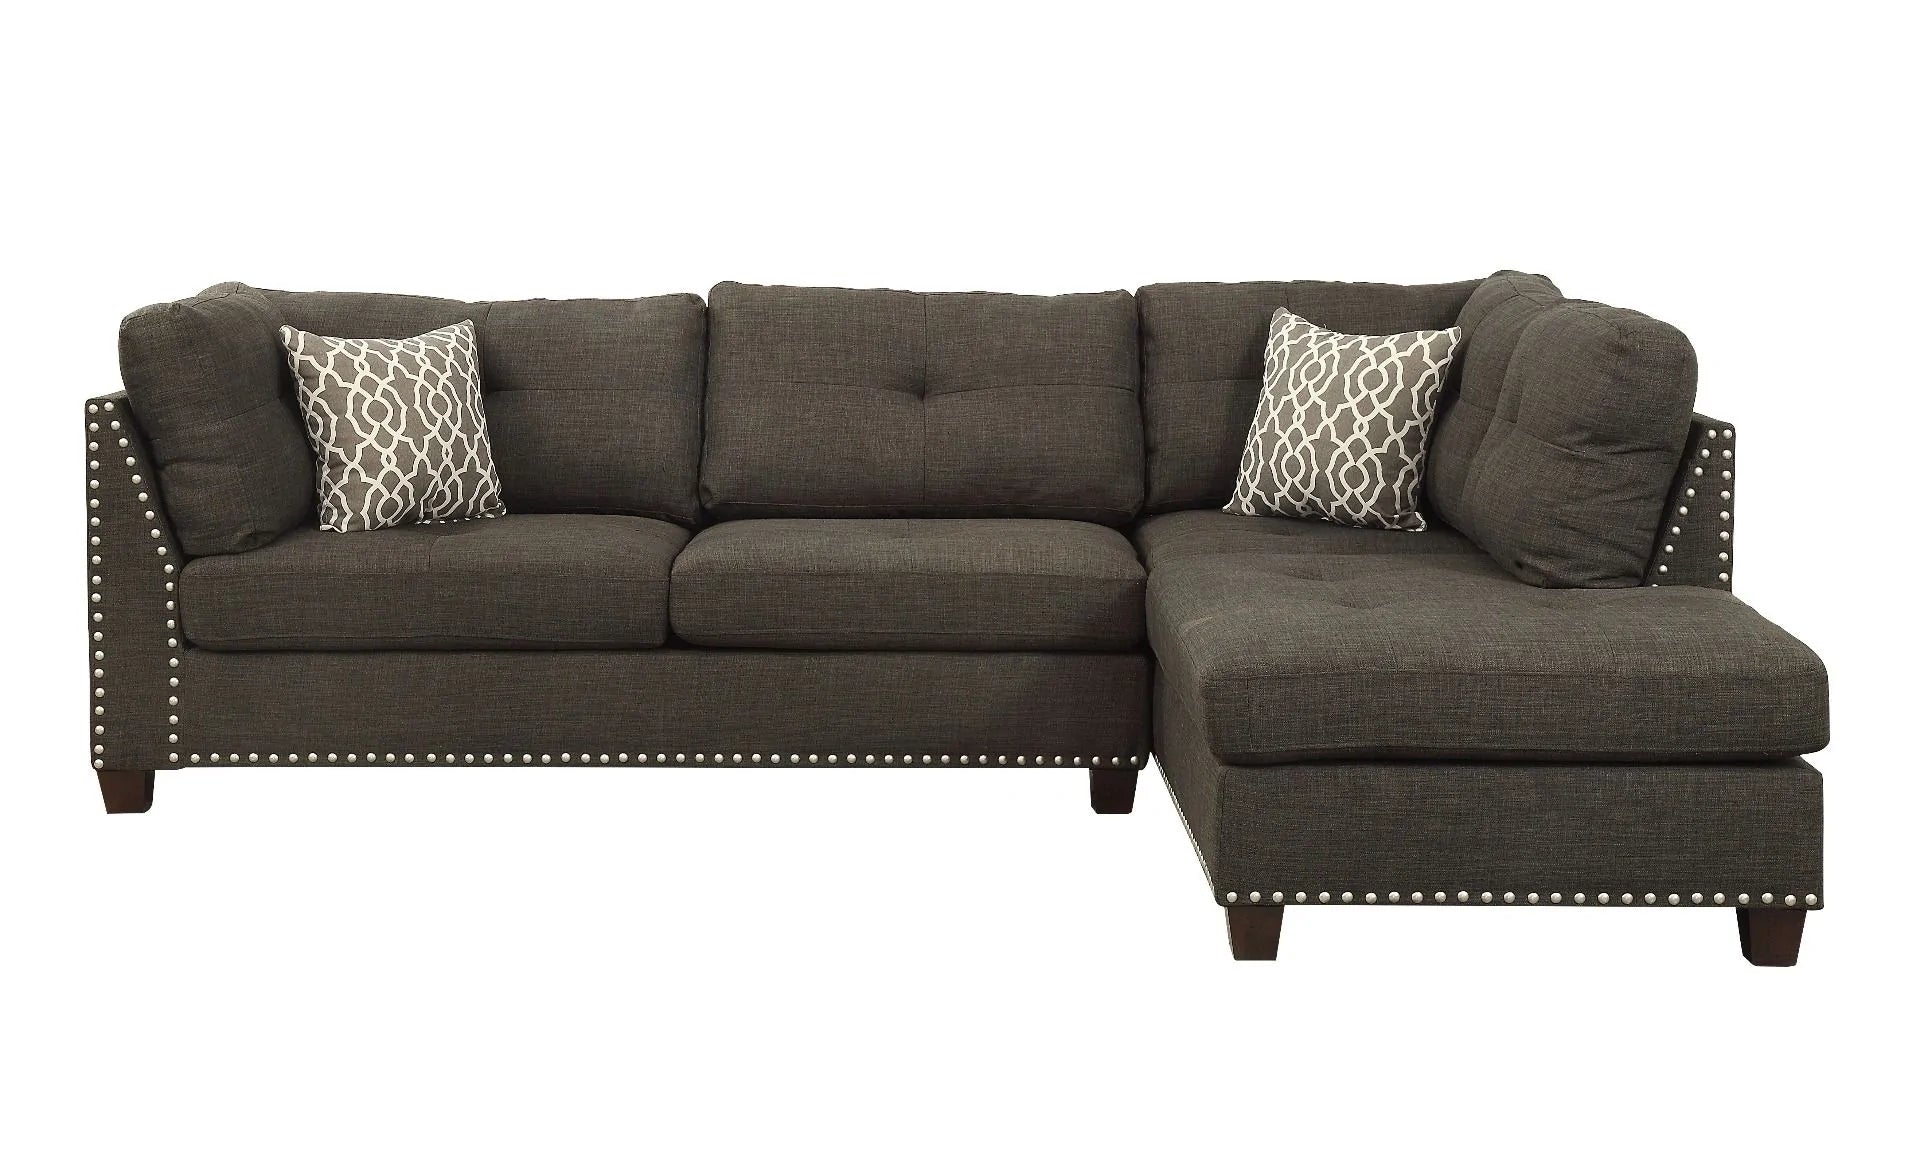 Laurissa Charcoal Linen Sectional Sofa Model 54375 By ACME Furniture